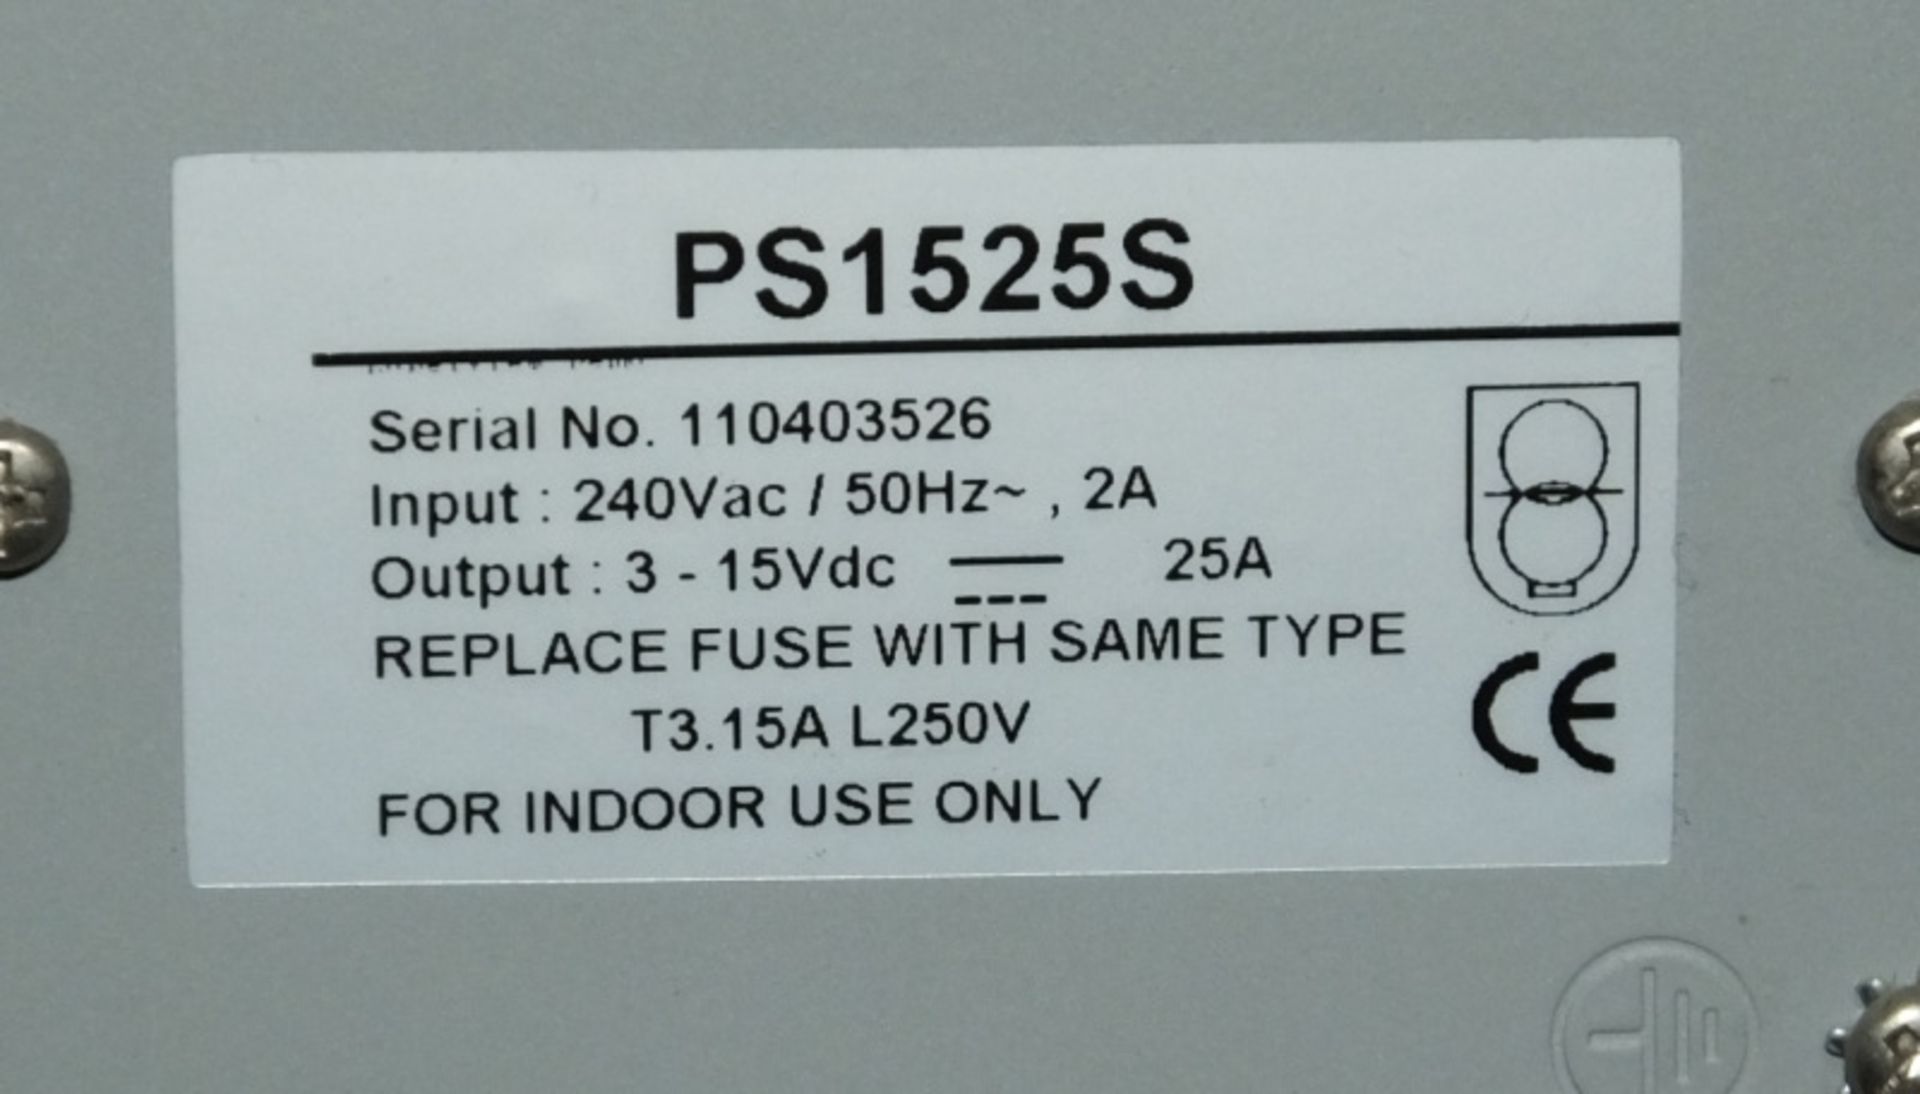 3x Rapid PS 1525S Switch Mode DC Regulated Power Supplies - Image 4 of 5